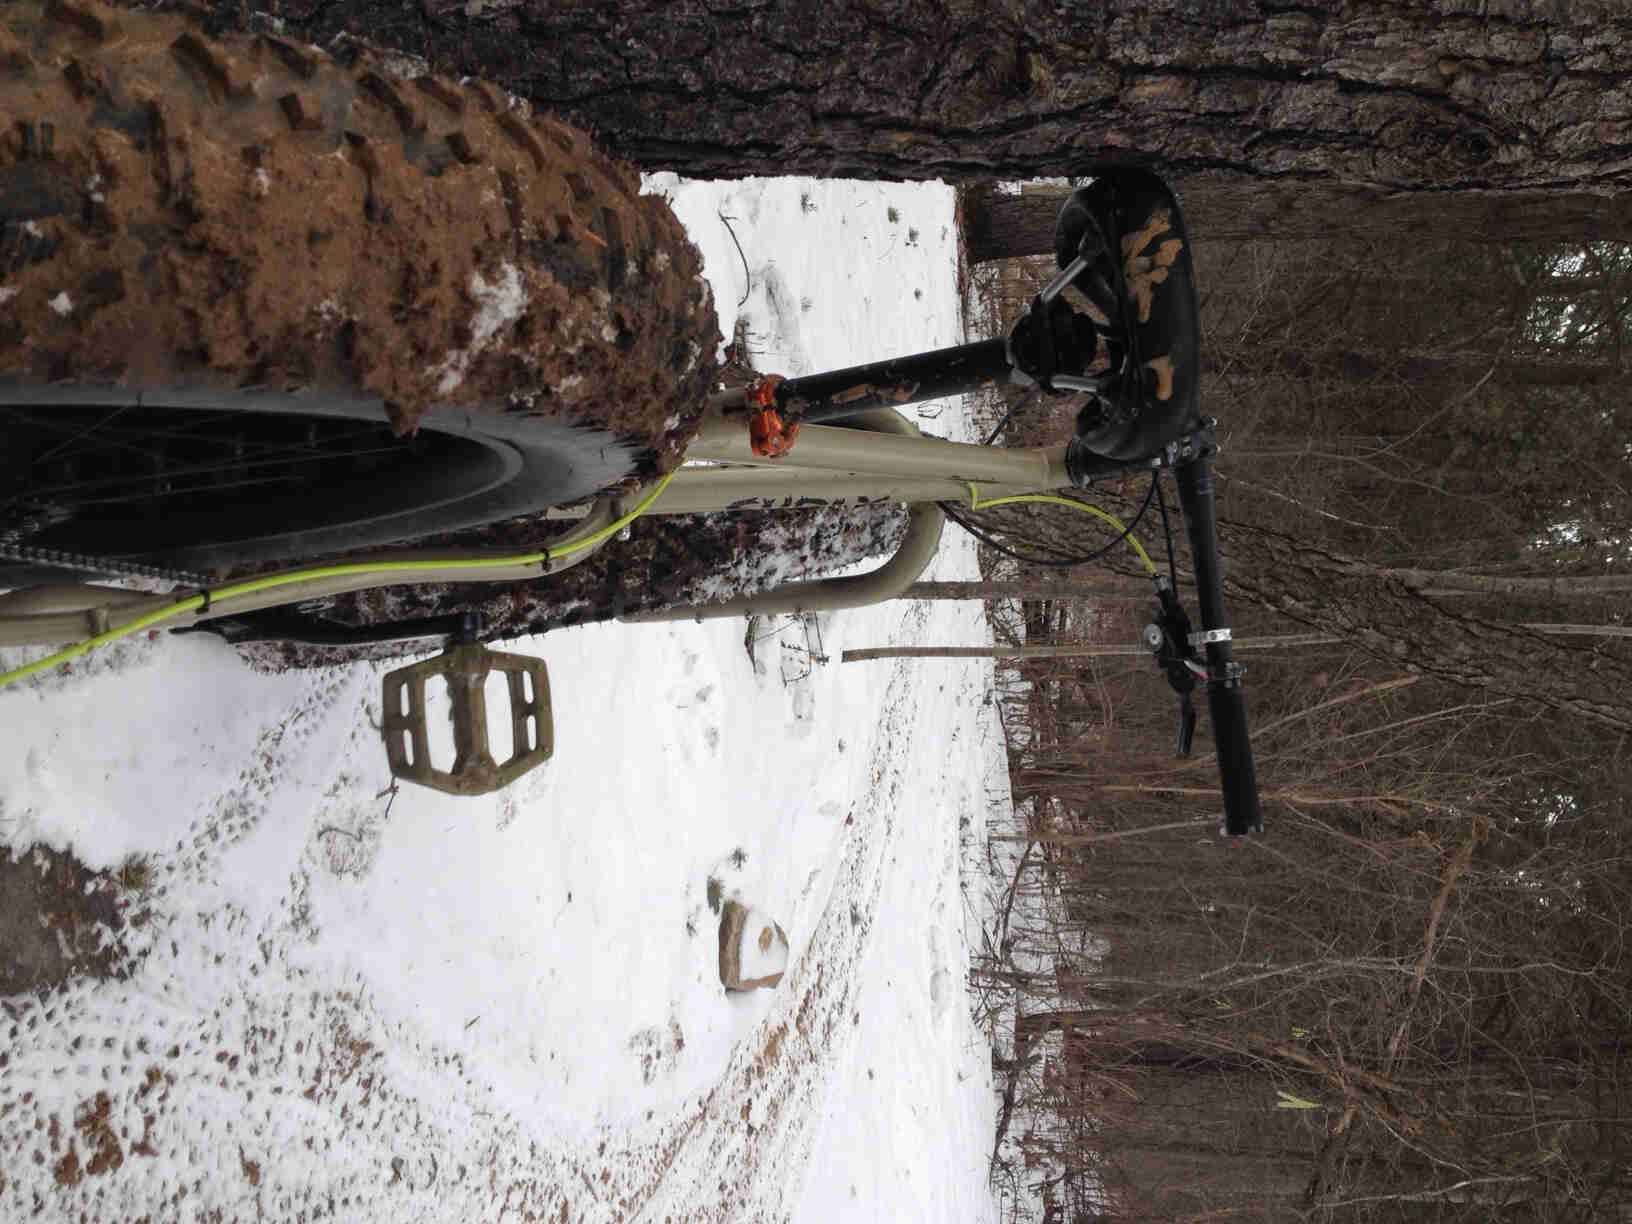 Rear view of a tan Surly Moonlander fat bike, leaning against a tree, facing down a snowy trail in the woods